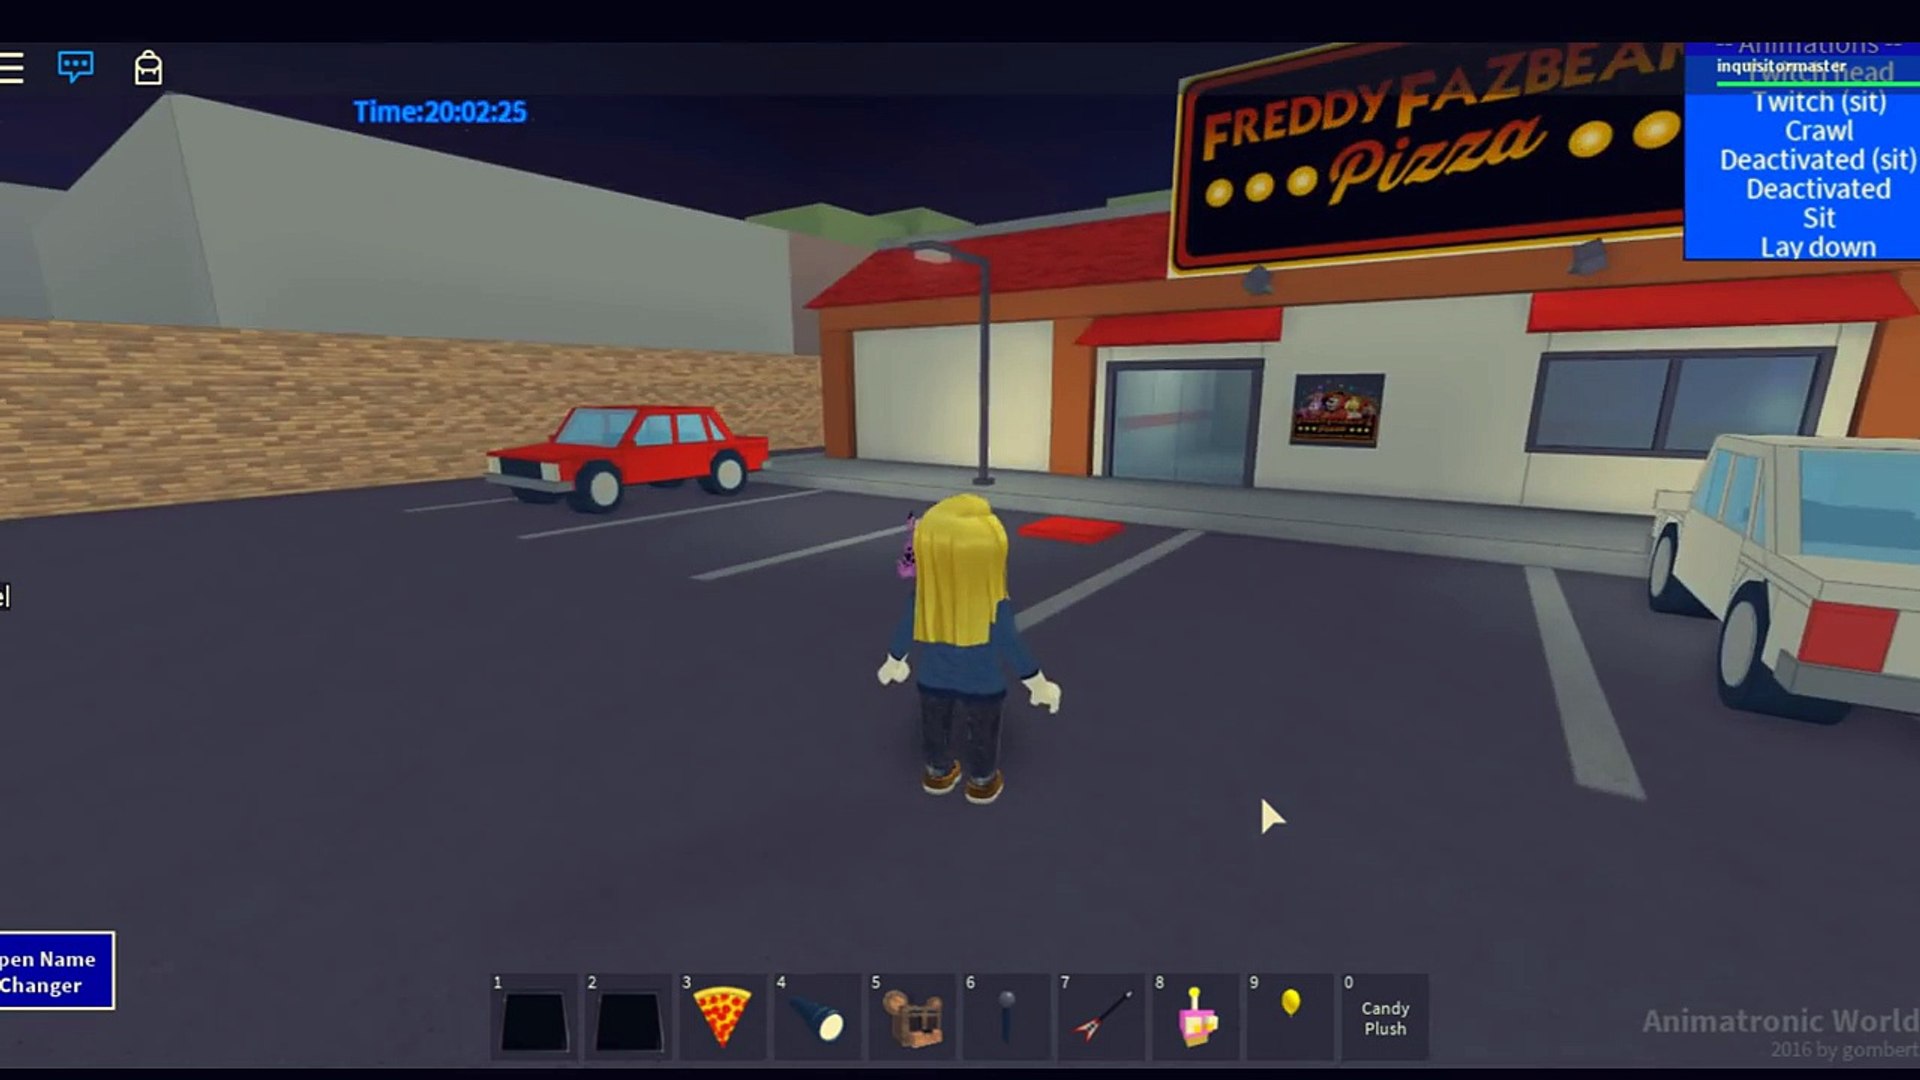 Animatronics Kidnapped Us Roblox Five Nights At Freddys